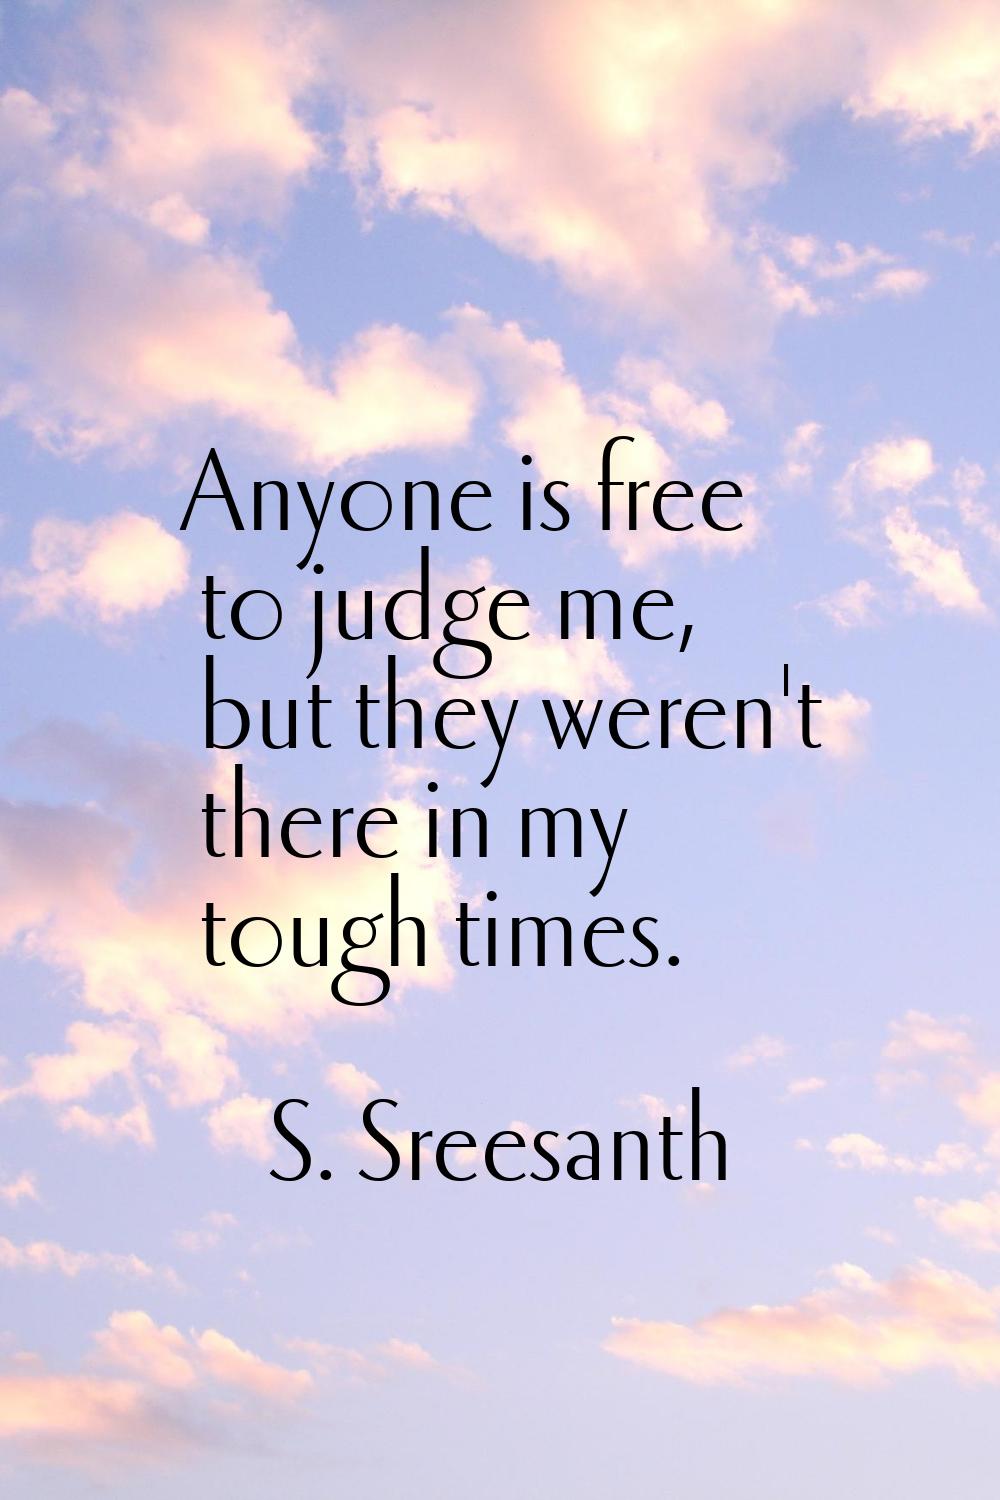 Anyone is free to judge me, but they weren't there in my tough times.